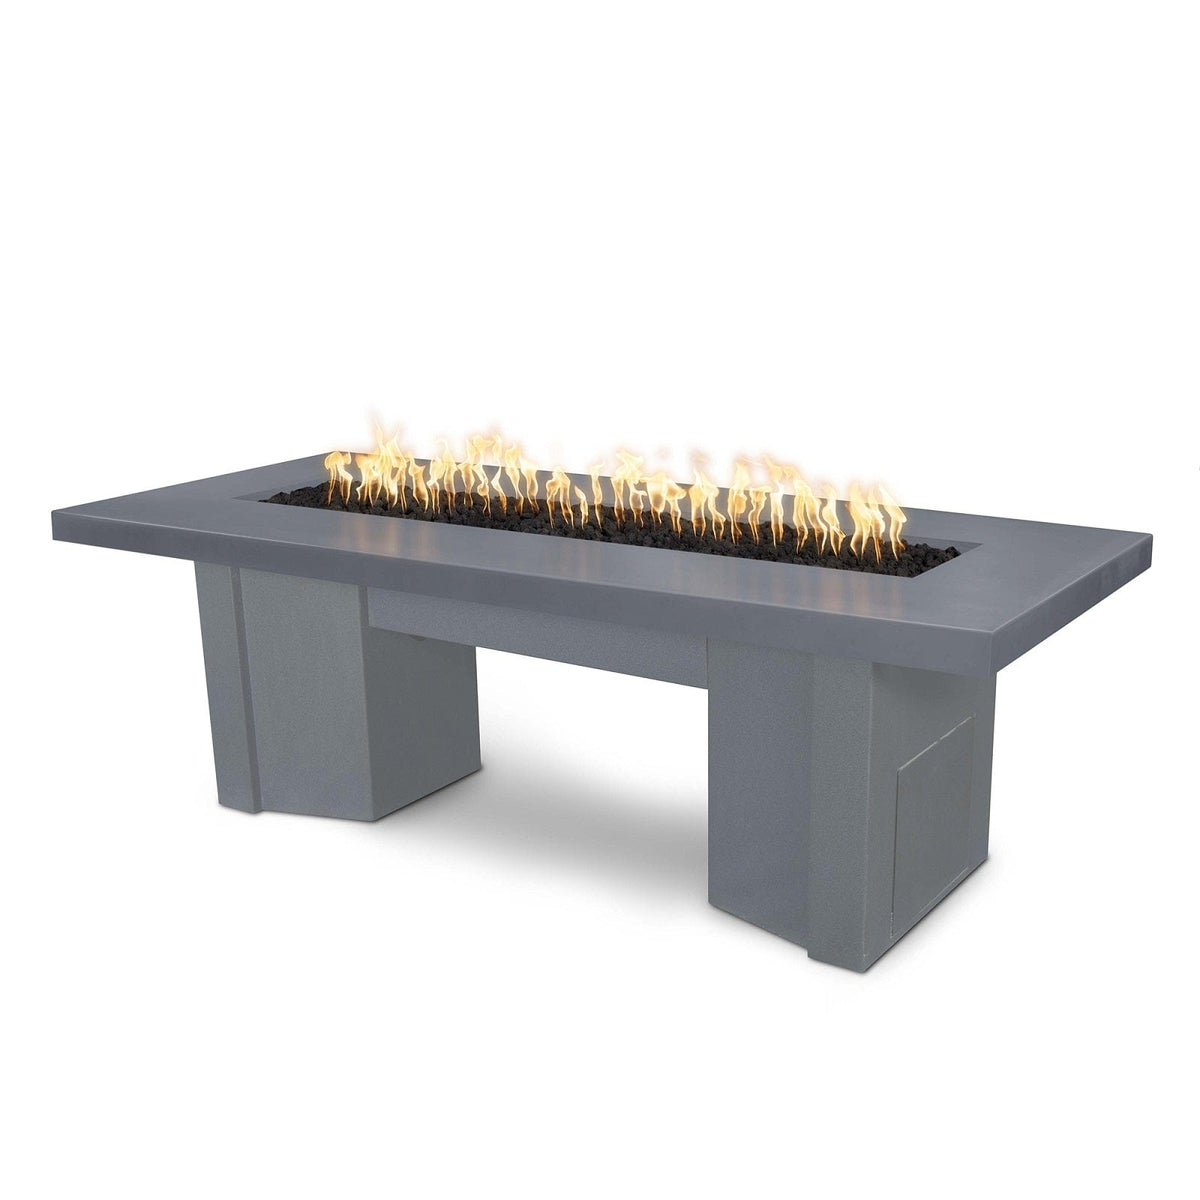 The Outdoor Plus Fire Features Gray (-GRY) / Gray Powder Coated Steel (-GRY) The Outdoor Plus 78&quot; Alameda Fire Table Smooth Concrete in Natural Gas - 110V Plug &amp; Play Electronic Ignition / OPT-ALMGFRC78EKIT-NG